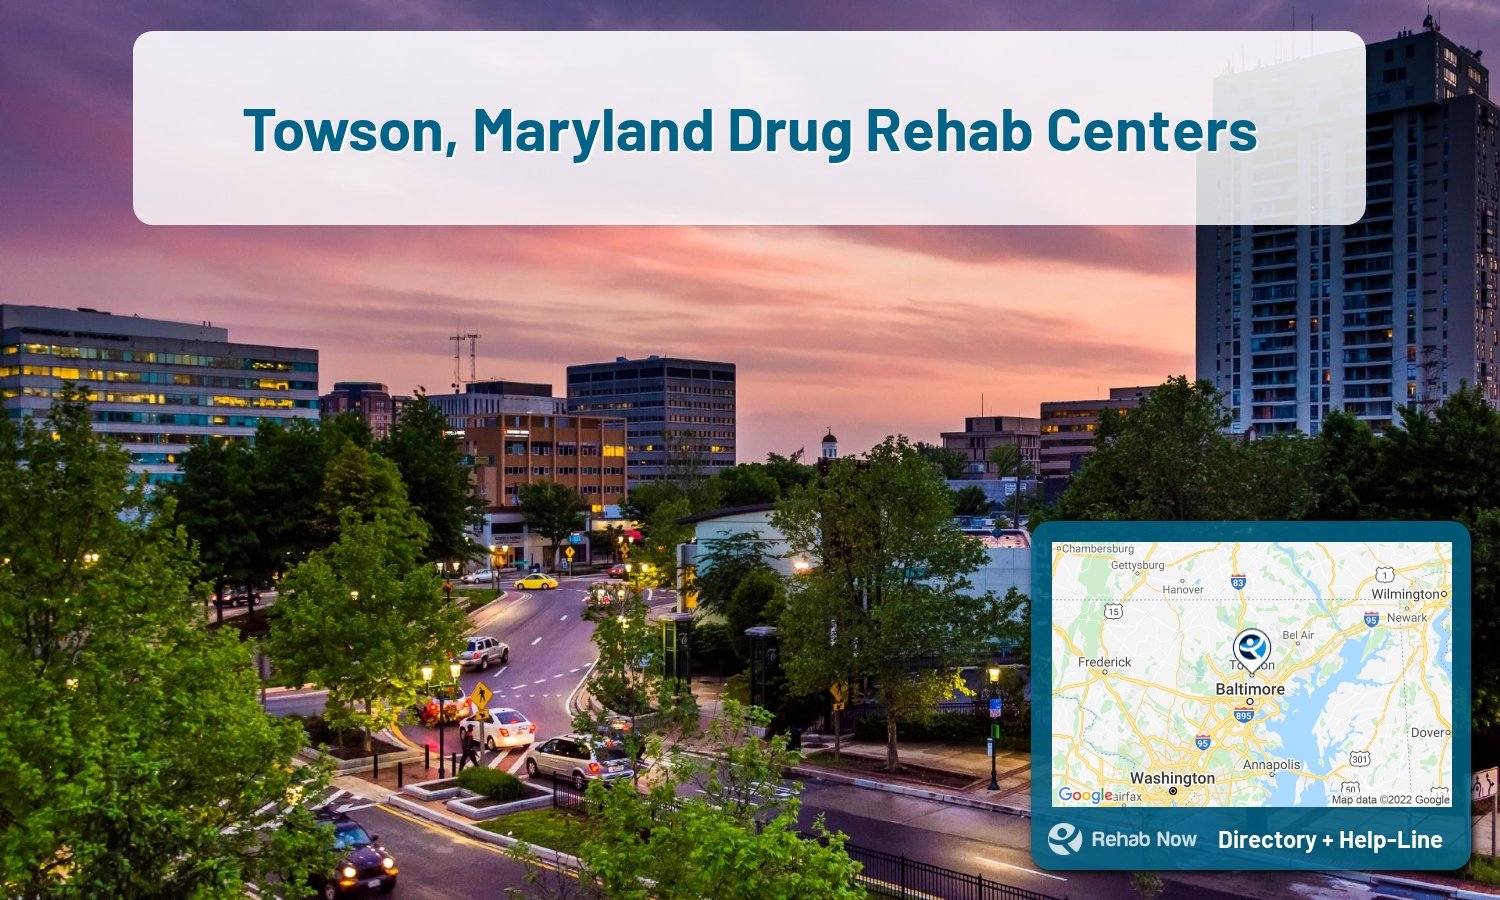 Towson, MD Treatment Centers. Find drug rehab in Towson, Maryland, or detox and treatment programs. Get the right help now!